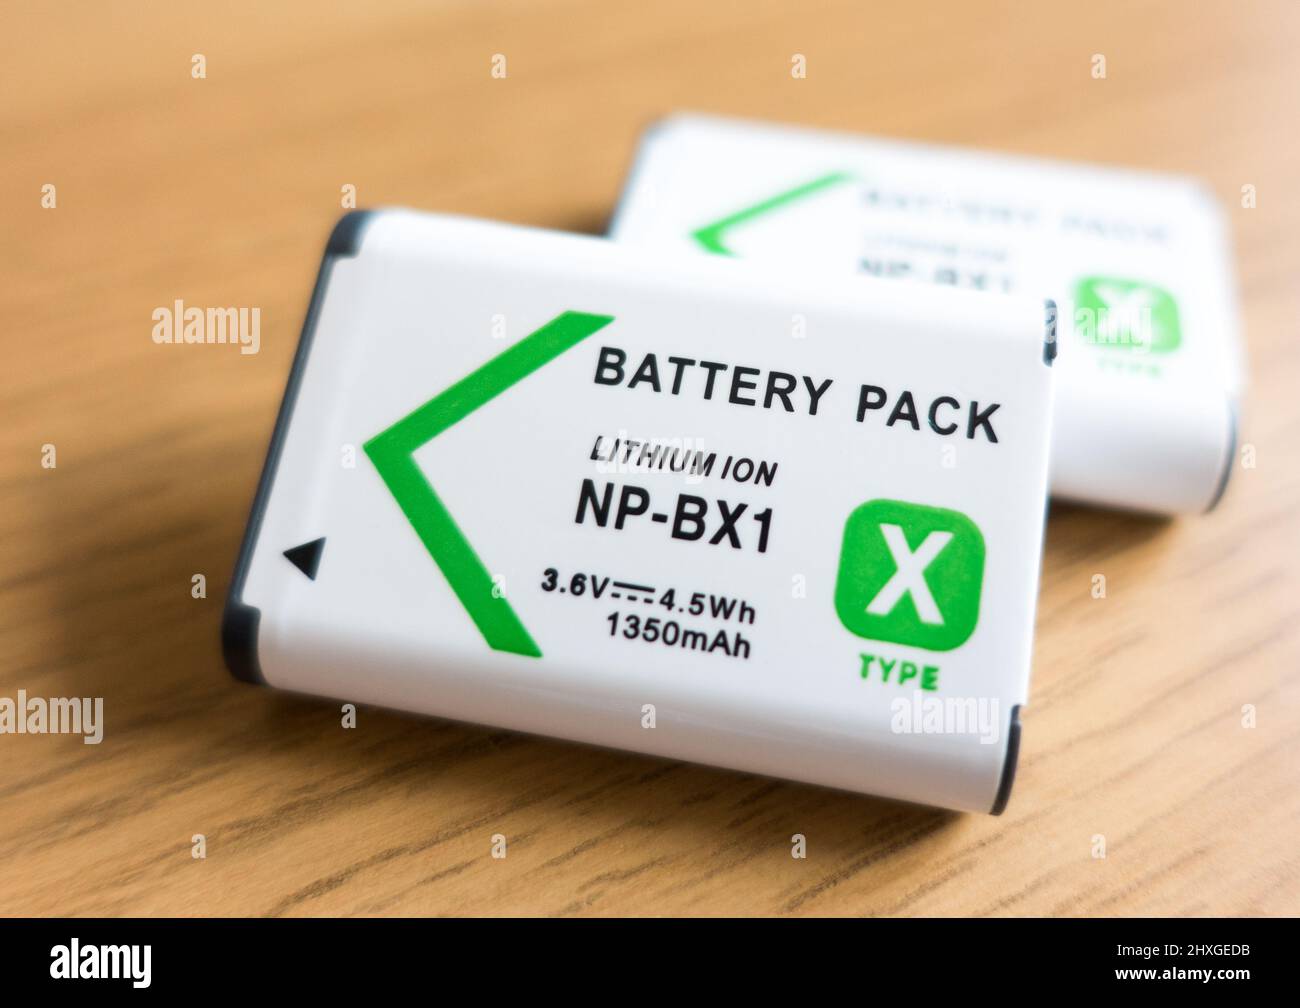 Re-chargeable Lithium Ion battery for compact cameras NP-BX1 Stock Photo